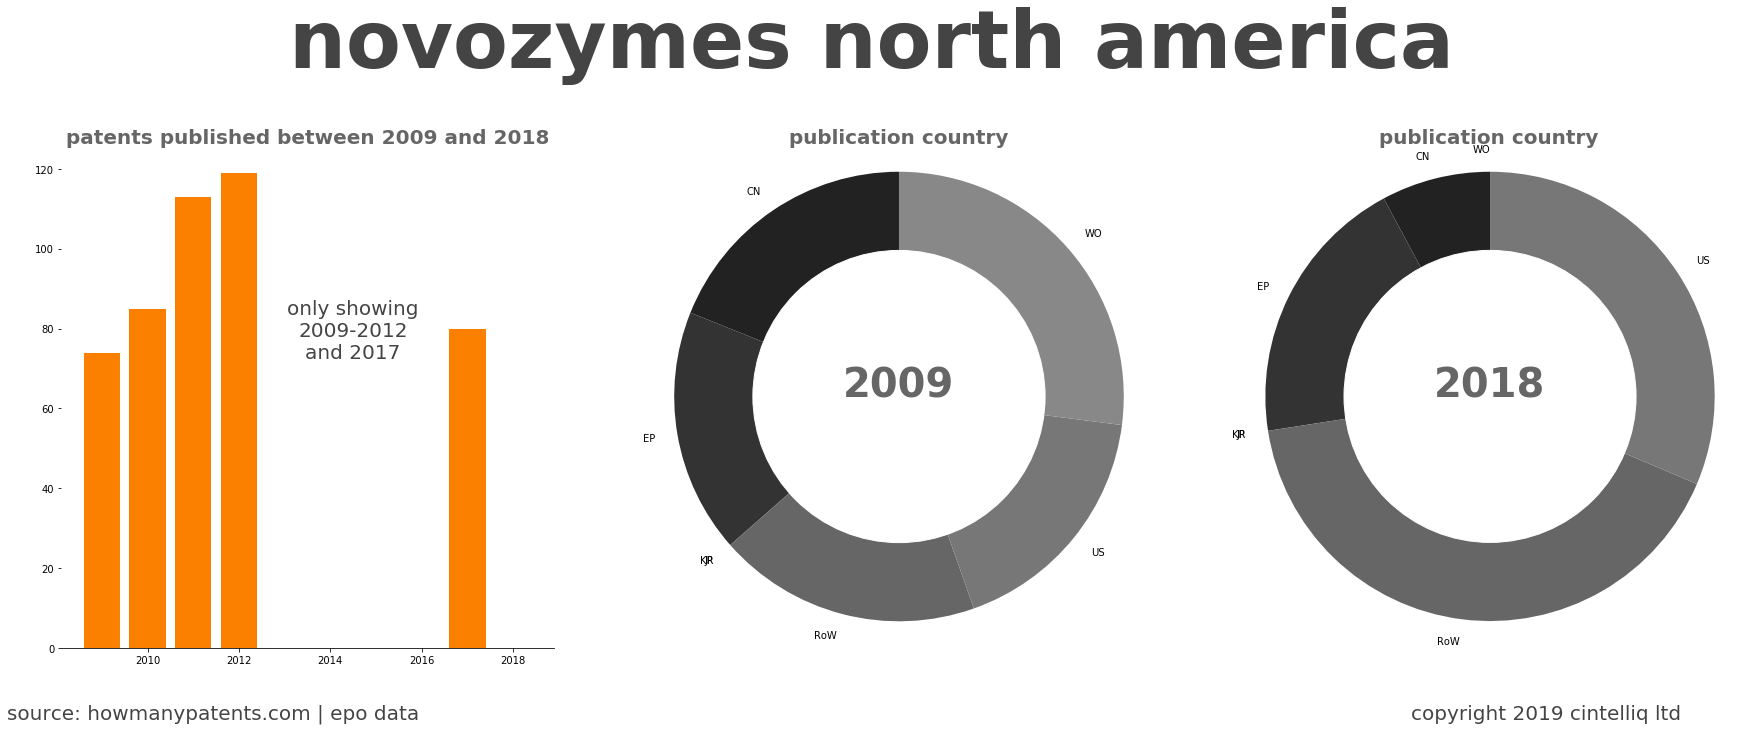 summary of patents for Novozymes North America